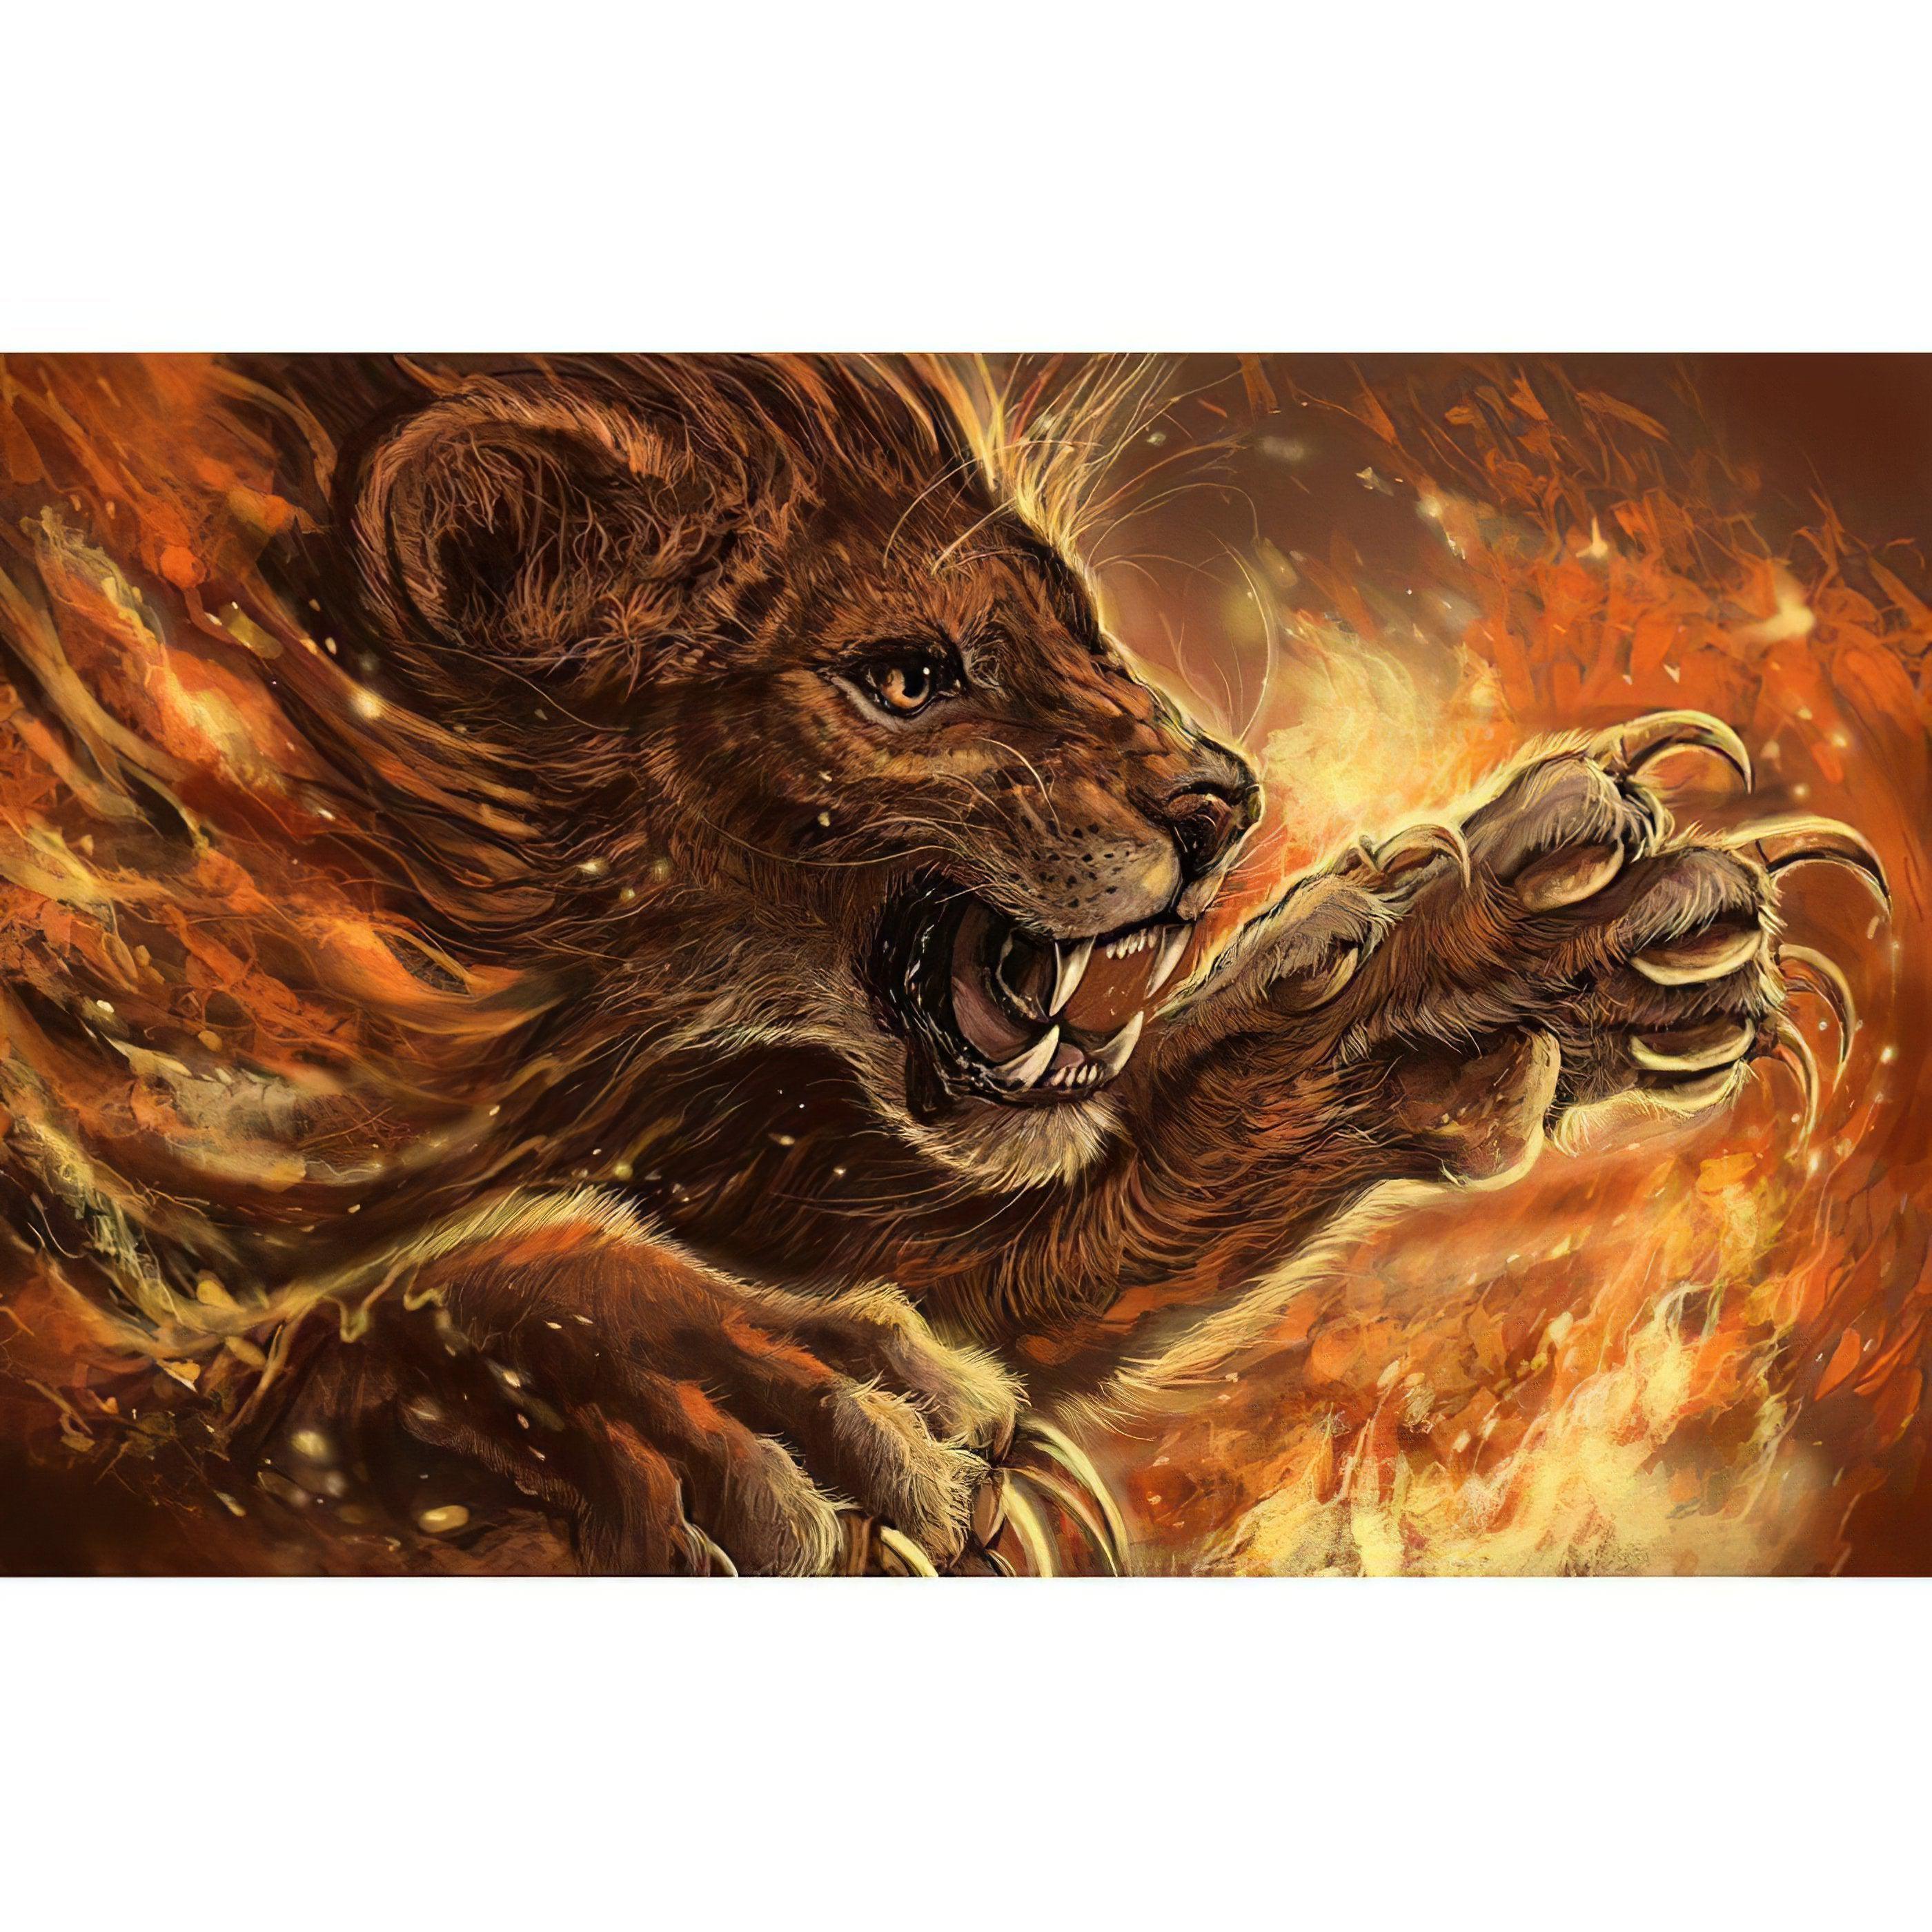 Feel the intensity of Lion In The Fire. Lion In The Fire - Diamondartlove